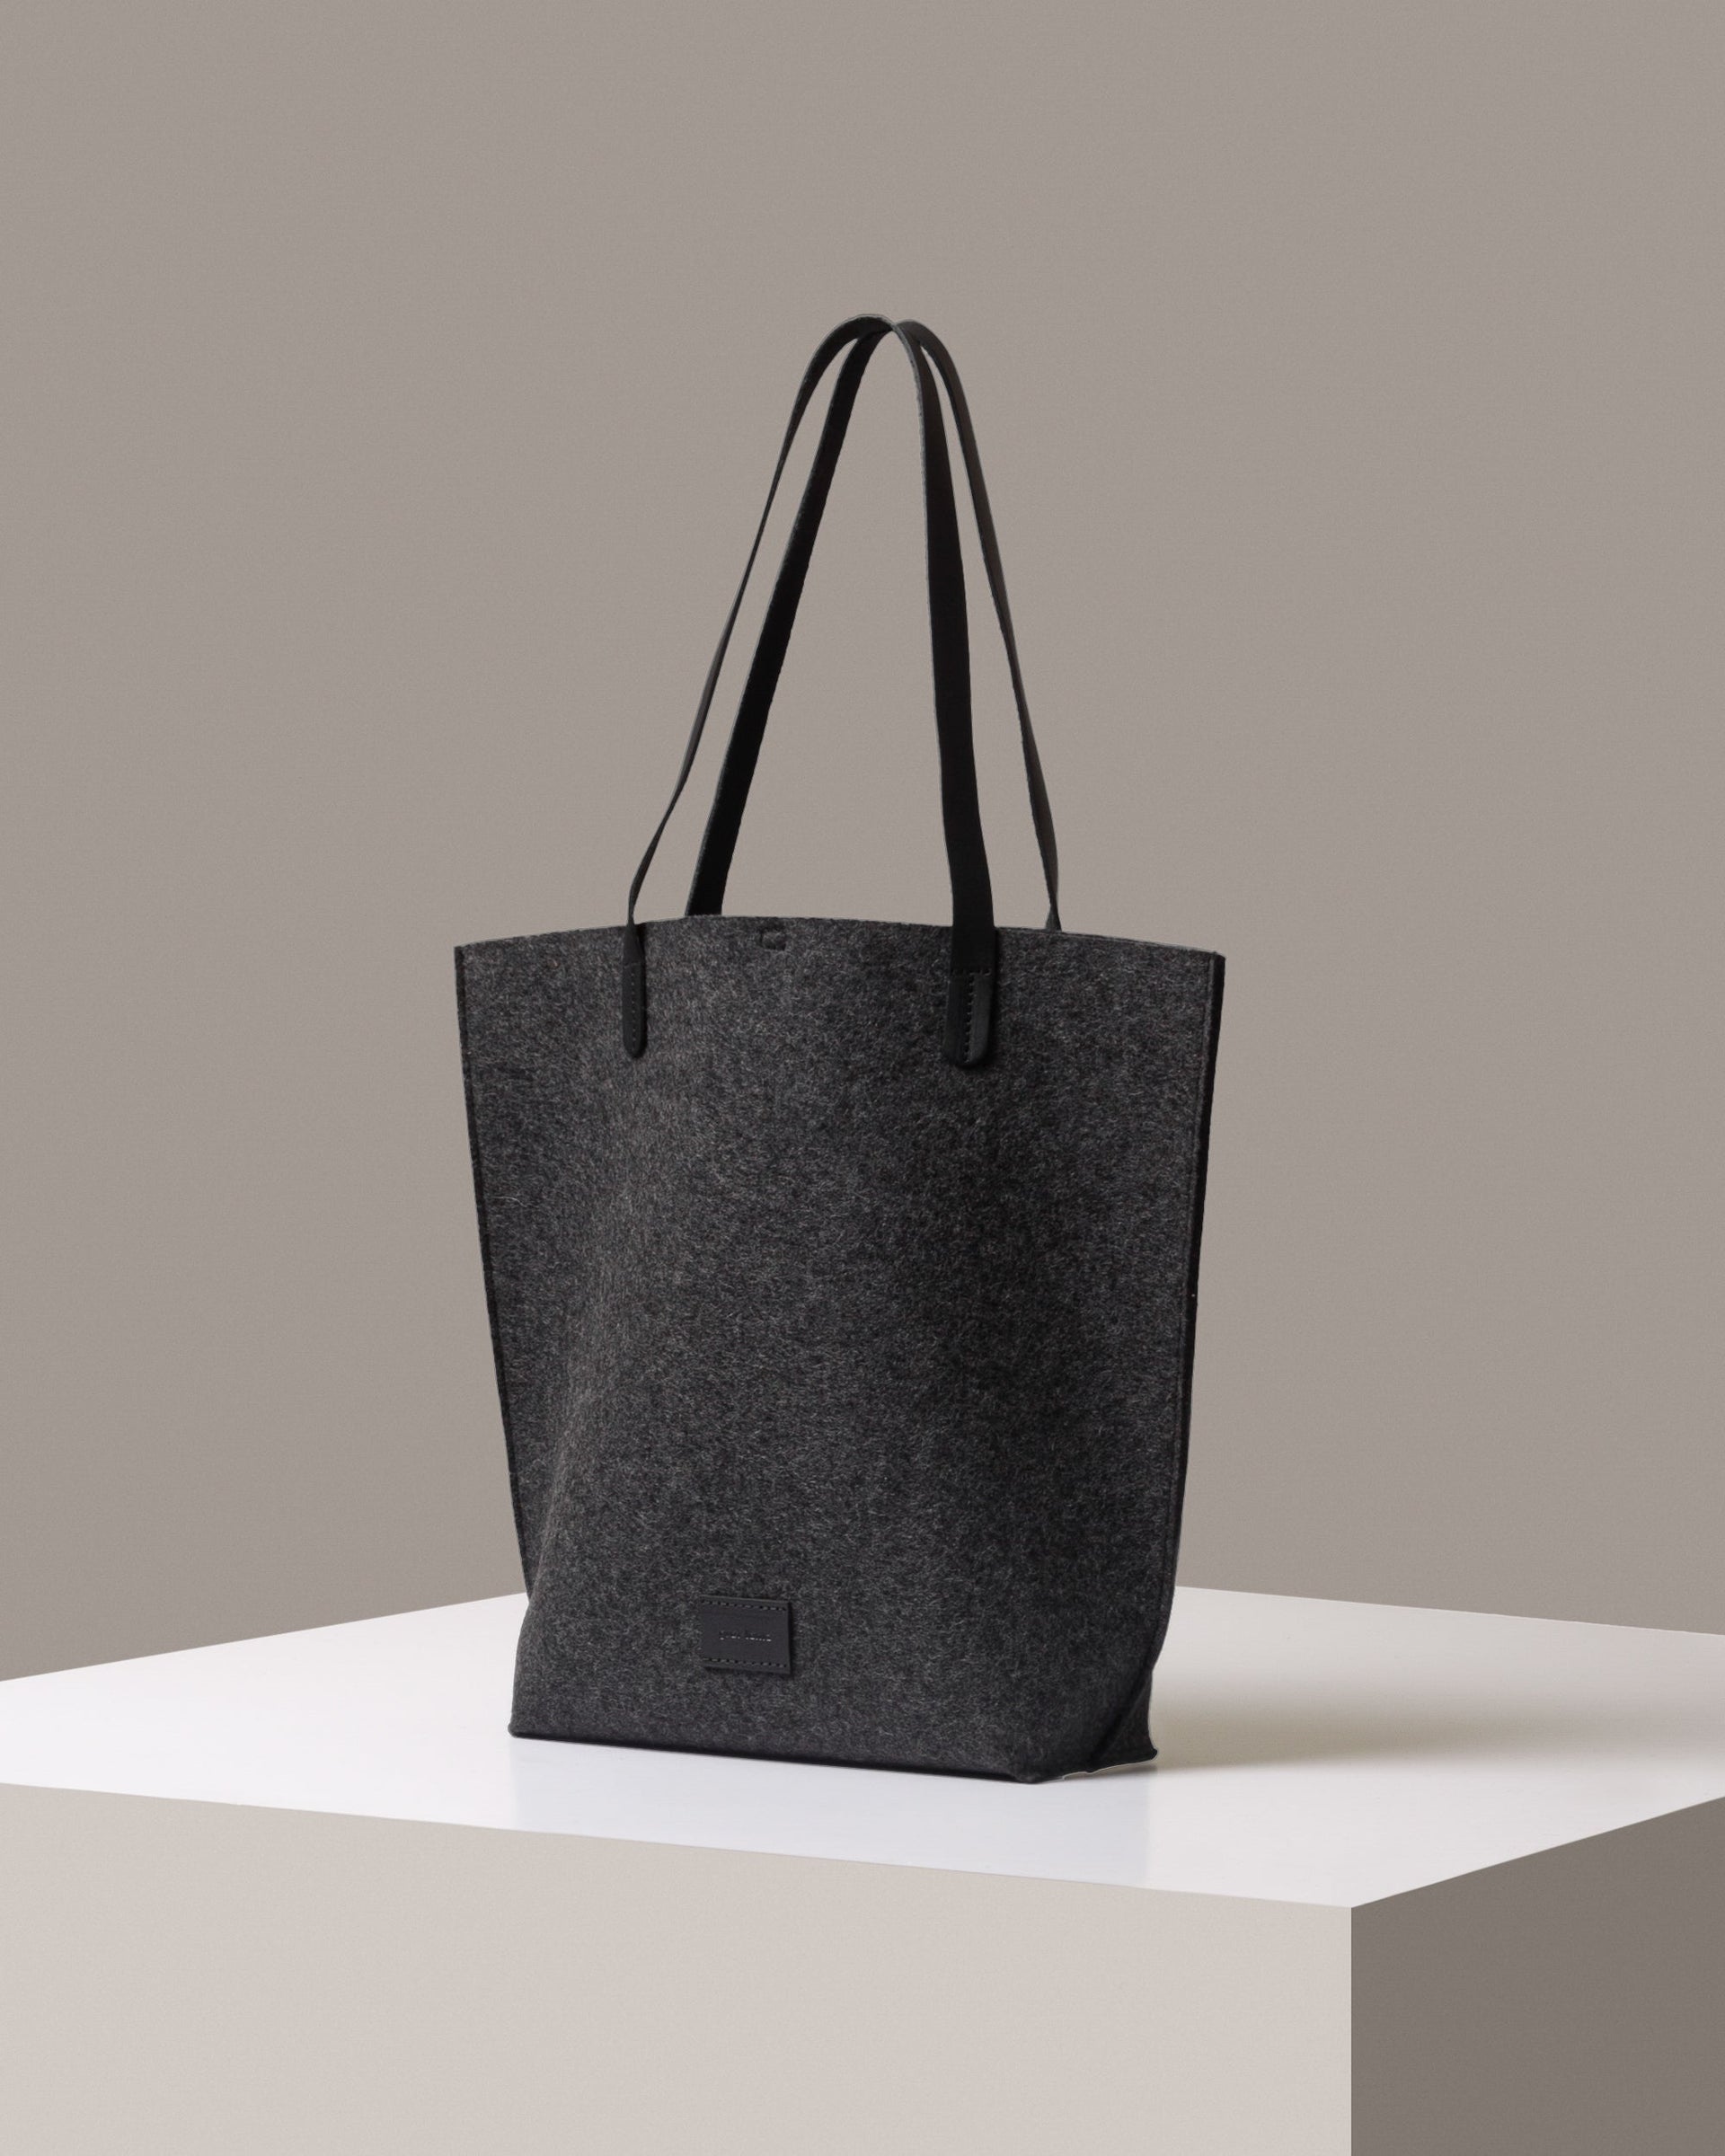 A Hana Merino Wool Felt Tote bag in dark gray with black leather handles, displayed in a three-quarter view on a white base